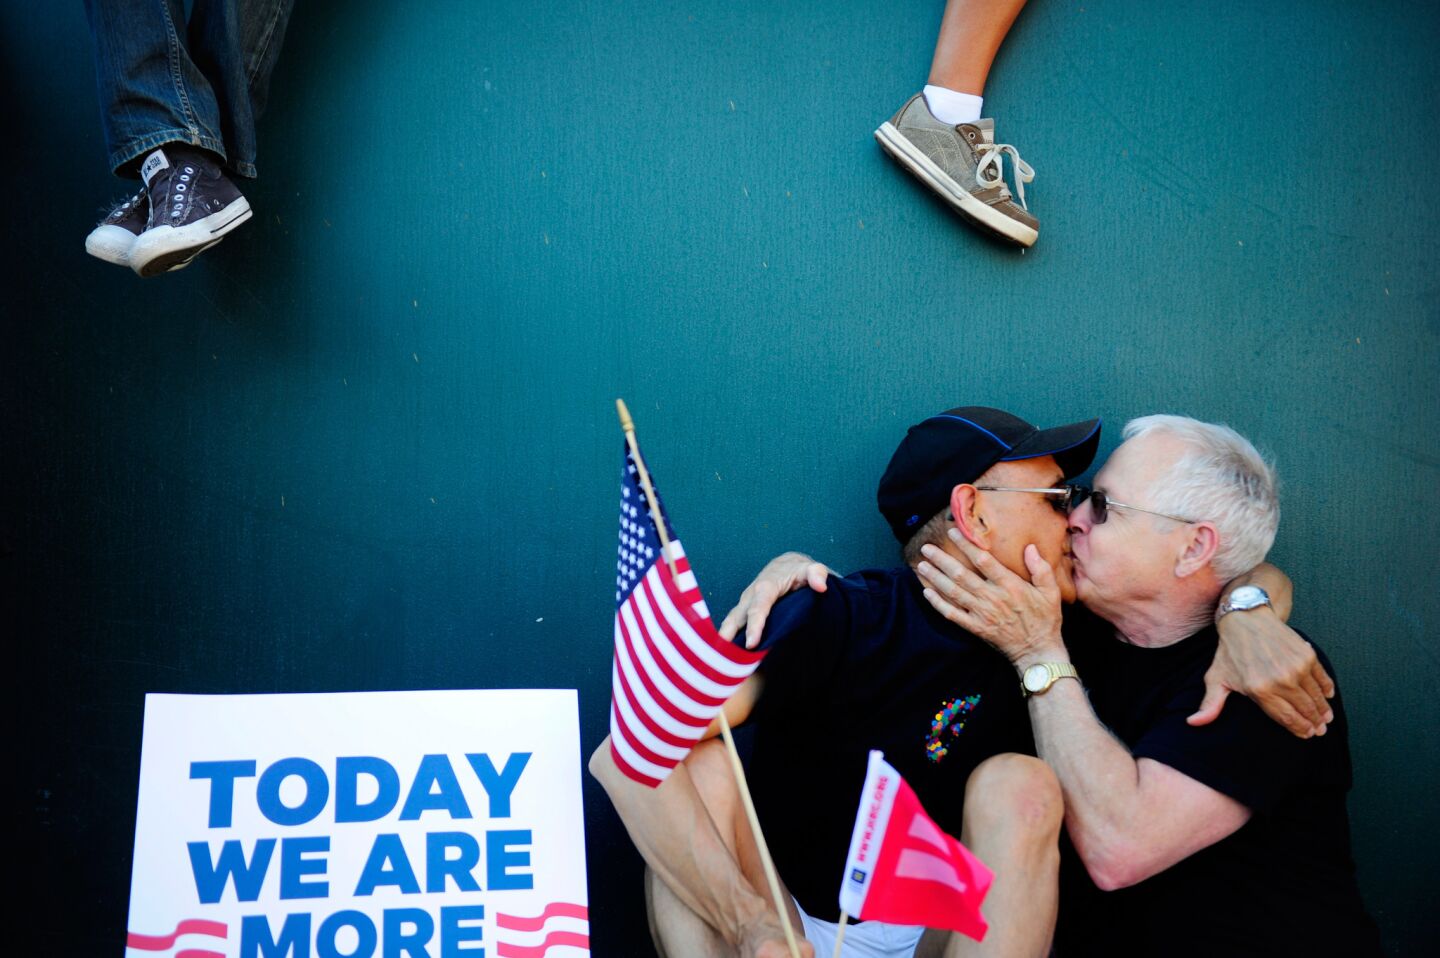 Carlos Jimenez, left, and Mike Dardenelle of the San Fernando Valley kiss during a gathering on San Vicente Boulevard celebrating the Supreme Court decision Wednesday affirming a lower court's ruling that declared Proposition 8, which banned gay marriage in California, unconstitutional. Jimenez and Dardenelle, who met online, have been dating for 15 years and plan to get married as soon as possible.